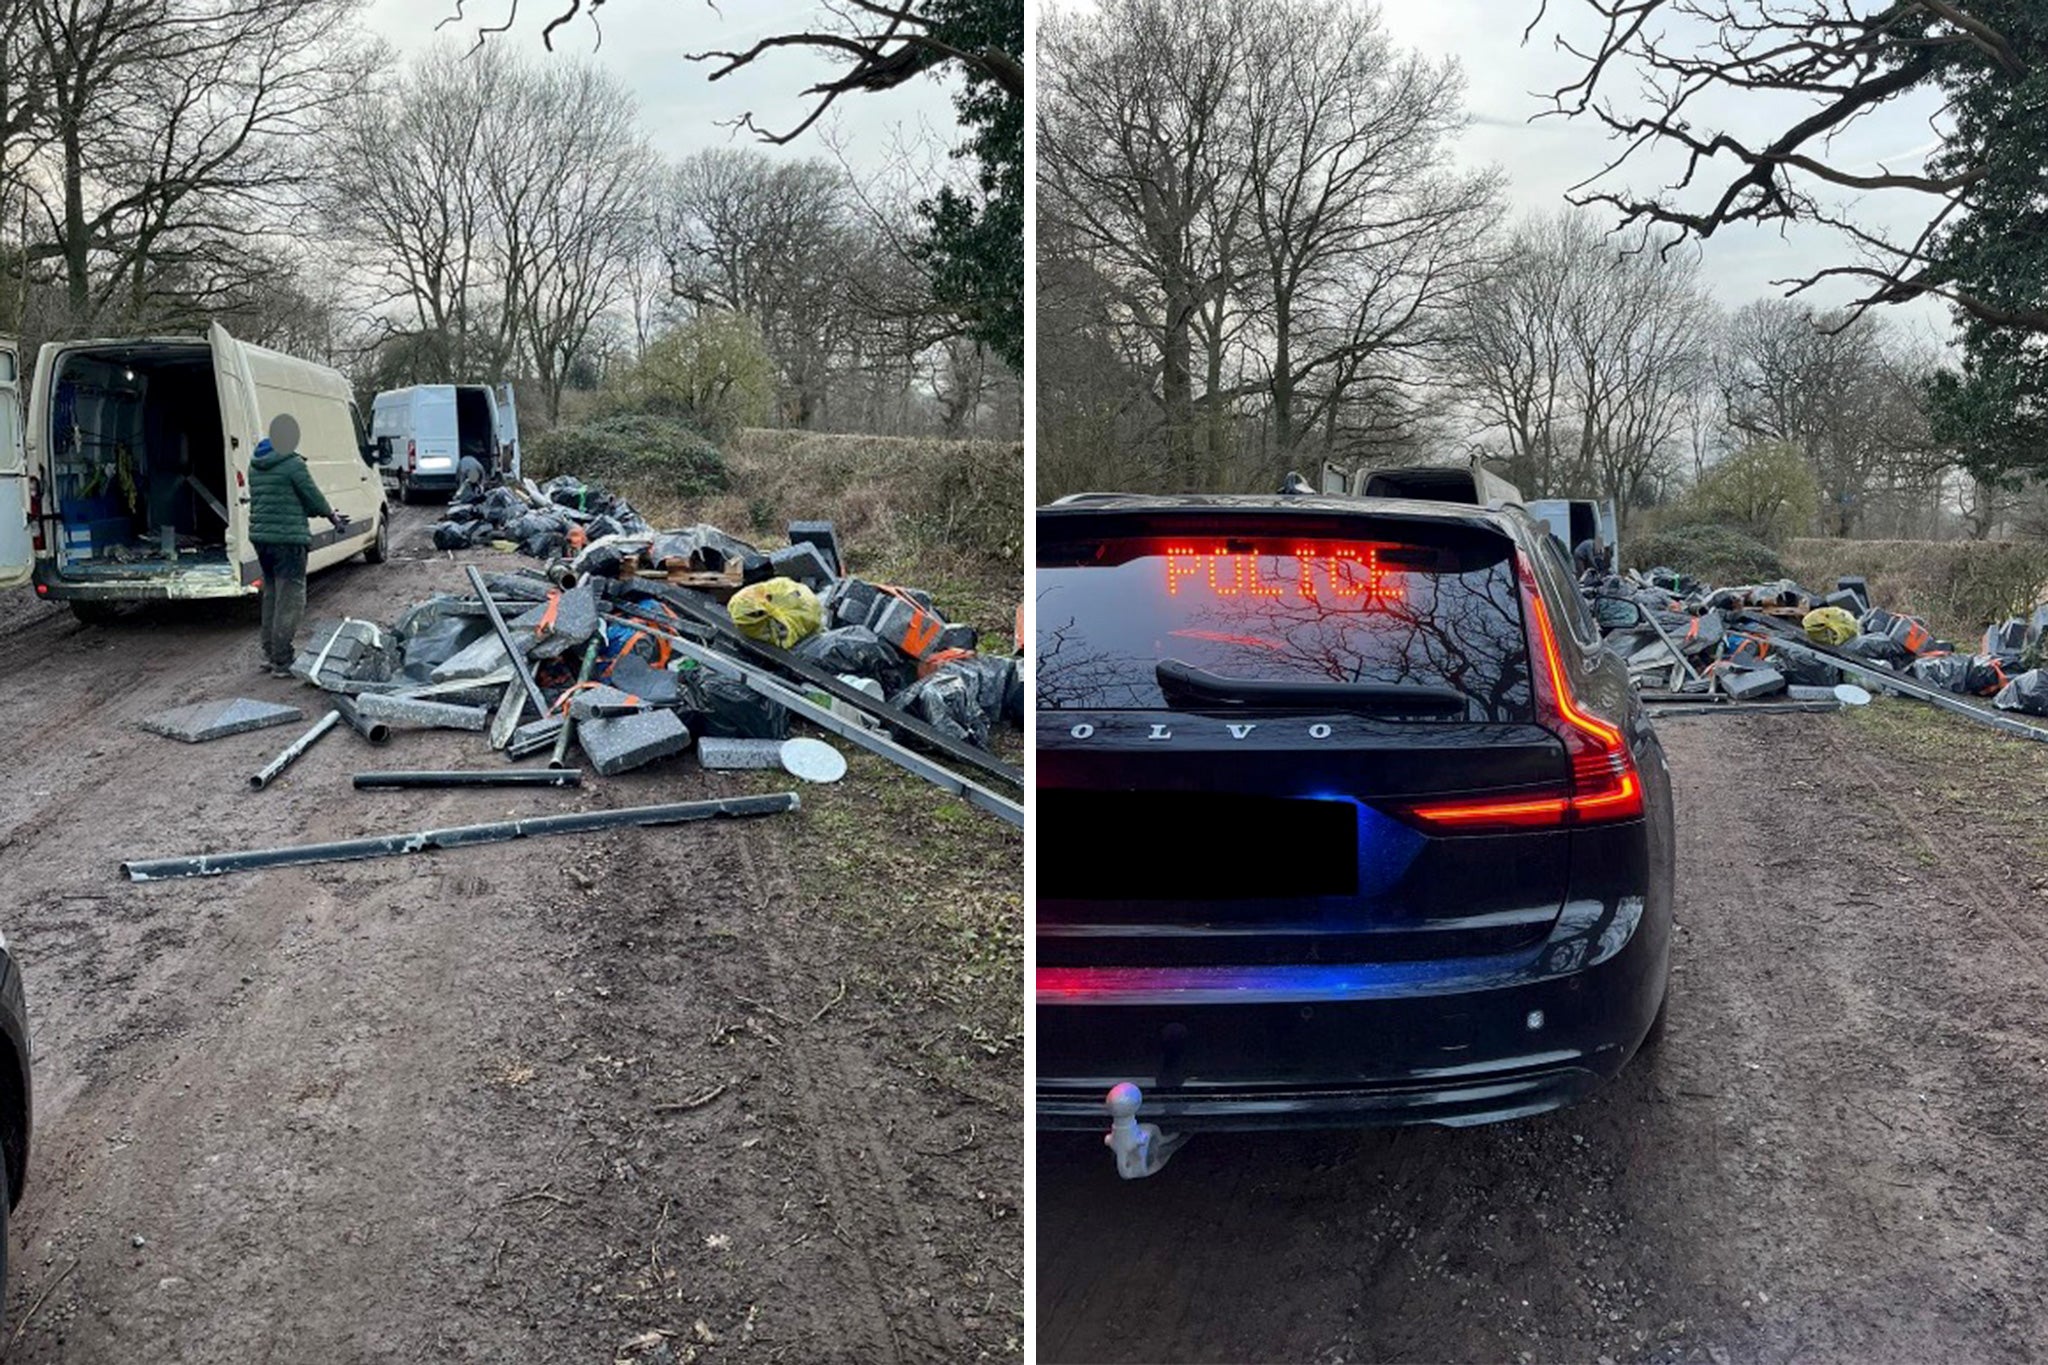 Bungling fly-tippers Ionut Bancunlea and Adrian Bivolaru were busted when local farmers caught them red handed